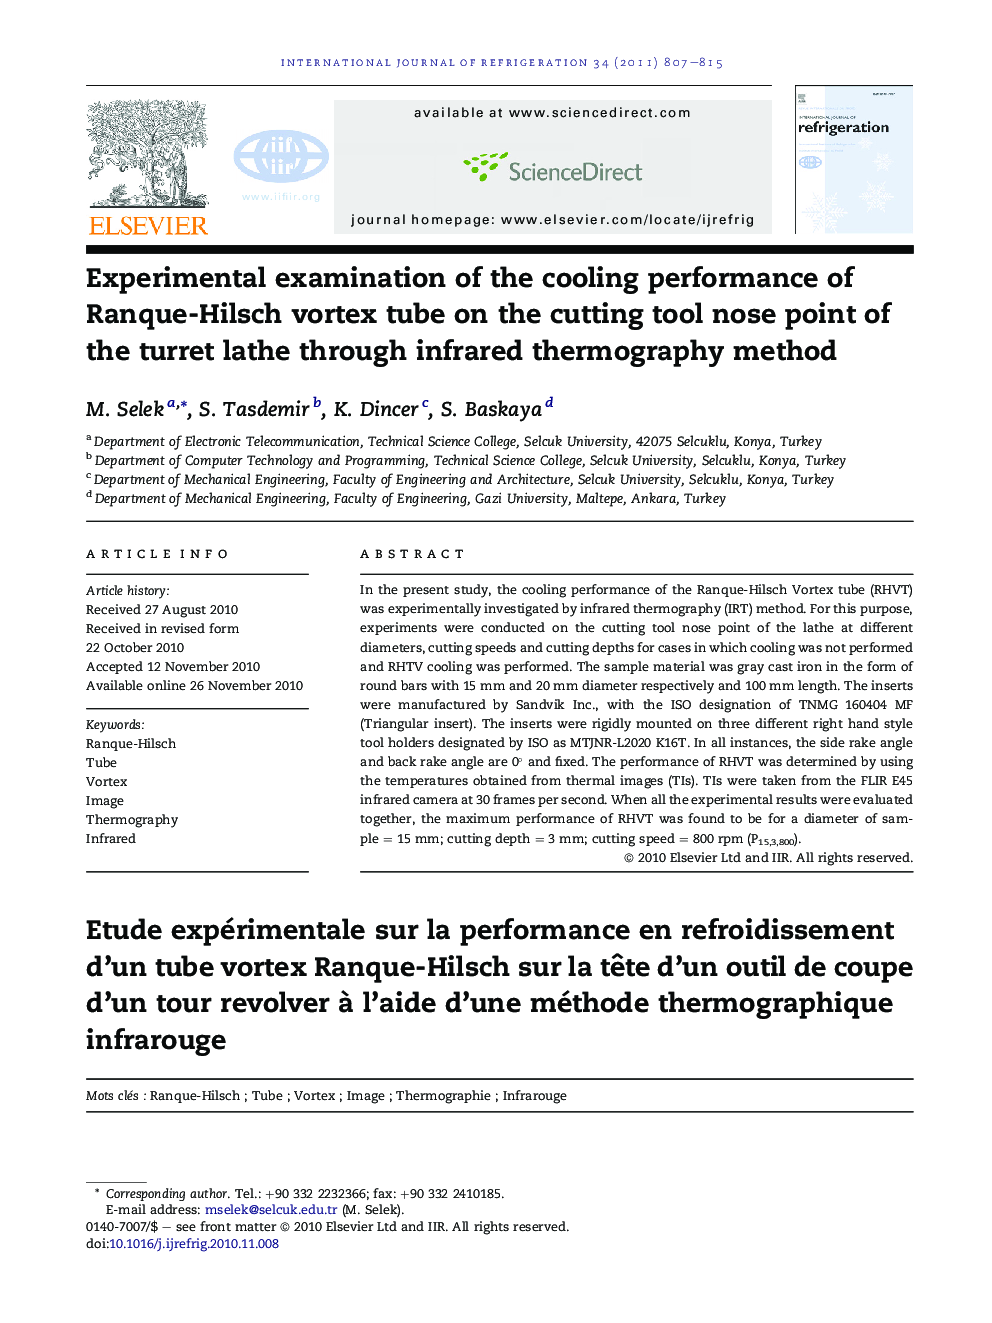 Experimental examination of the cooling performance of Ranque-Hilsch vortex tube on the cutting tool nose point of the turret lathe through infrared thermography method